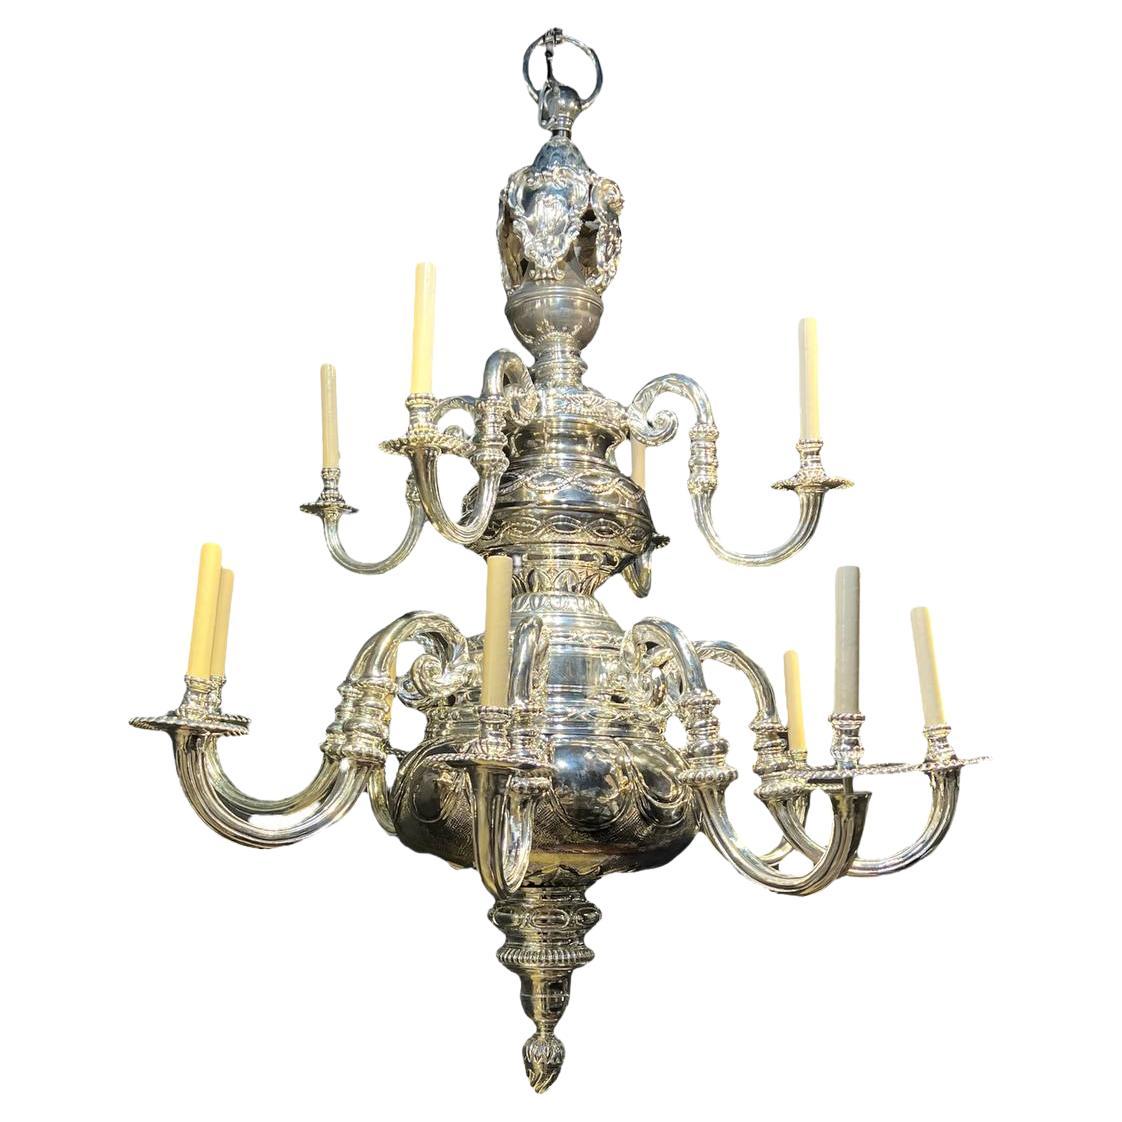 1900's Caldwell Large Silver Plated 12 Lights Chandelier with Engraved Details